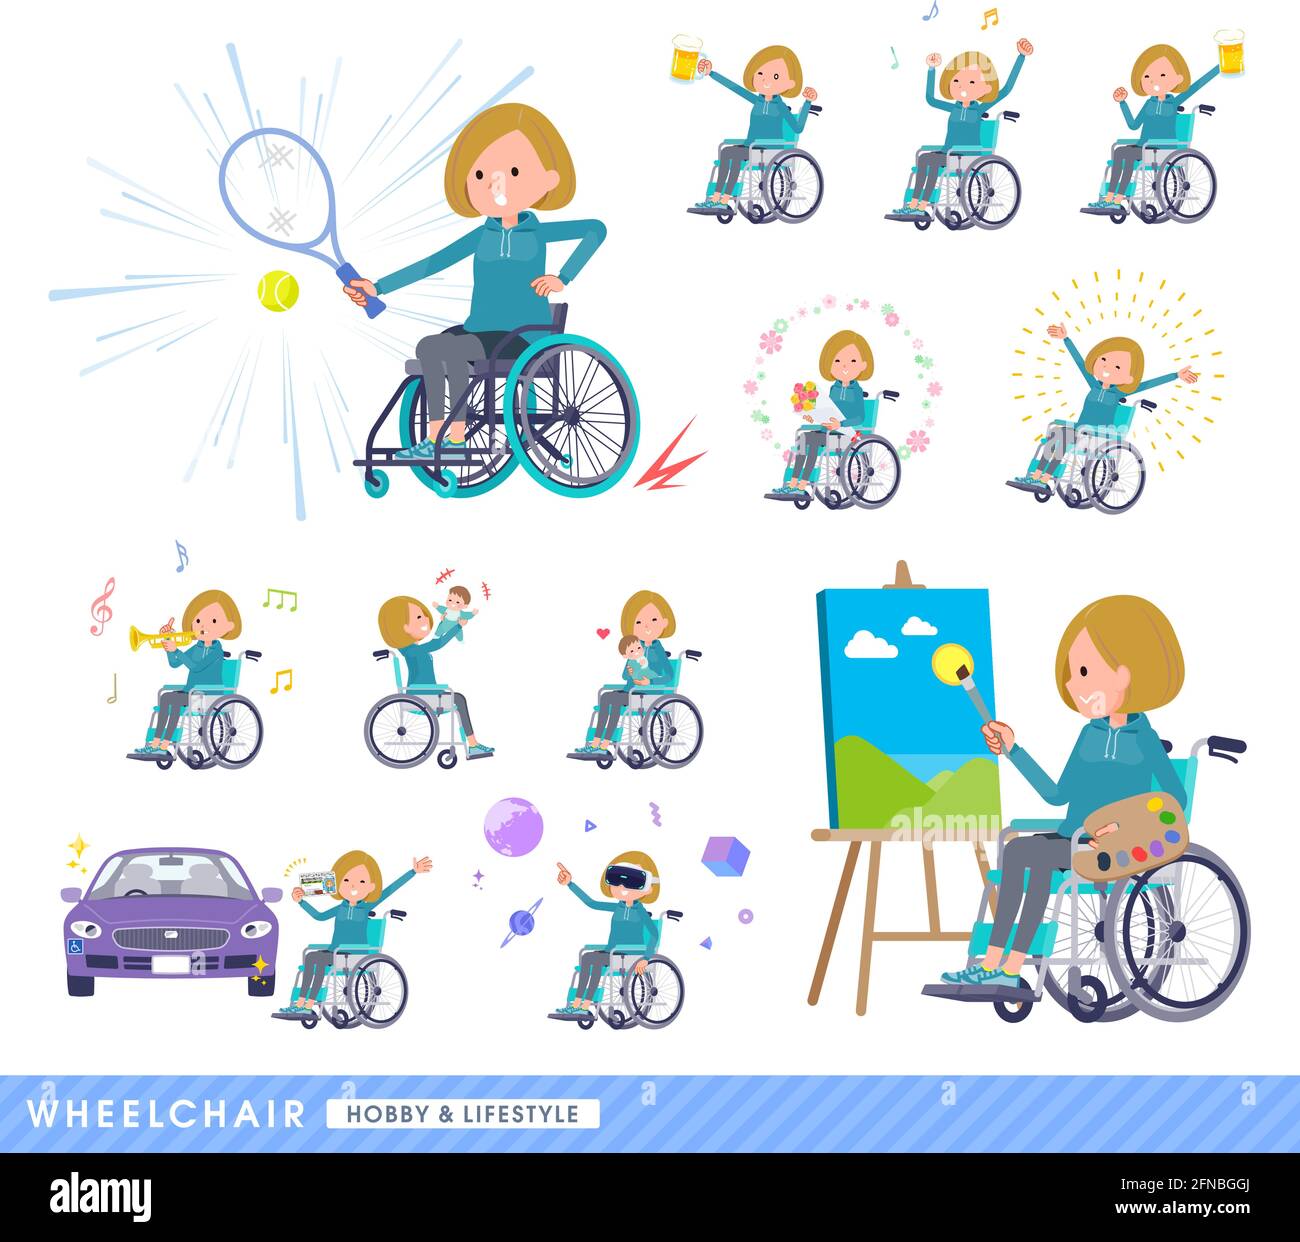 A set of women in a hoodie in a wheelchair.About hobbies and lifestyle.It's vector art so easy to edit. Stock Vector